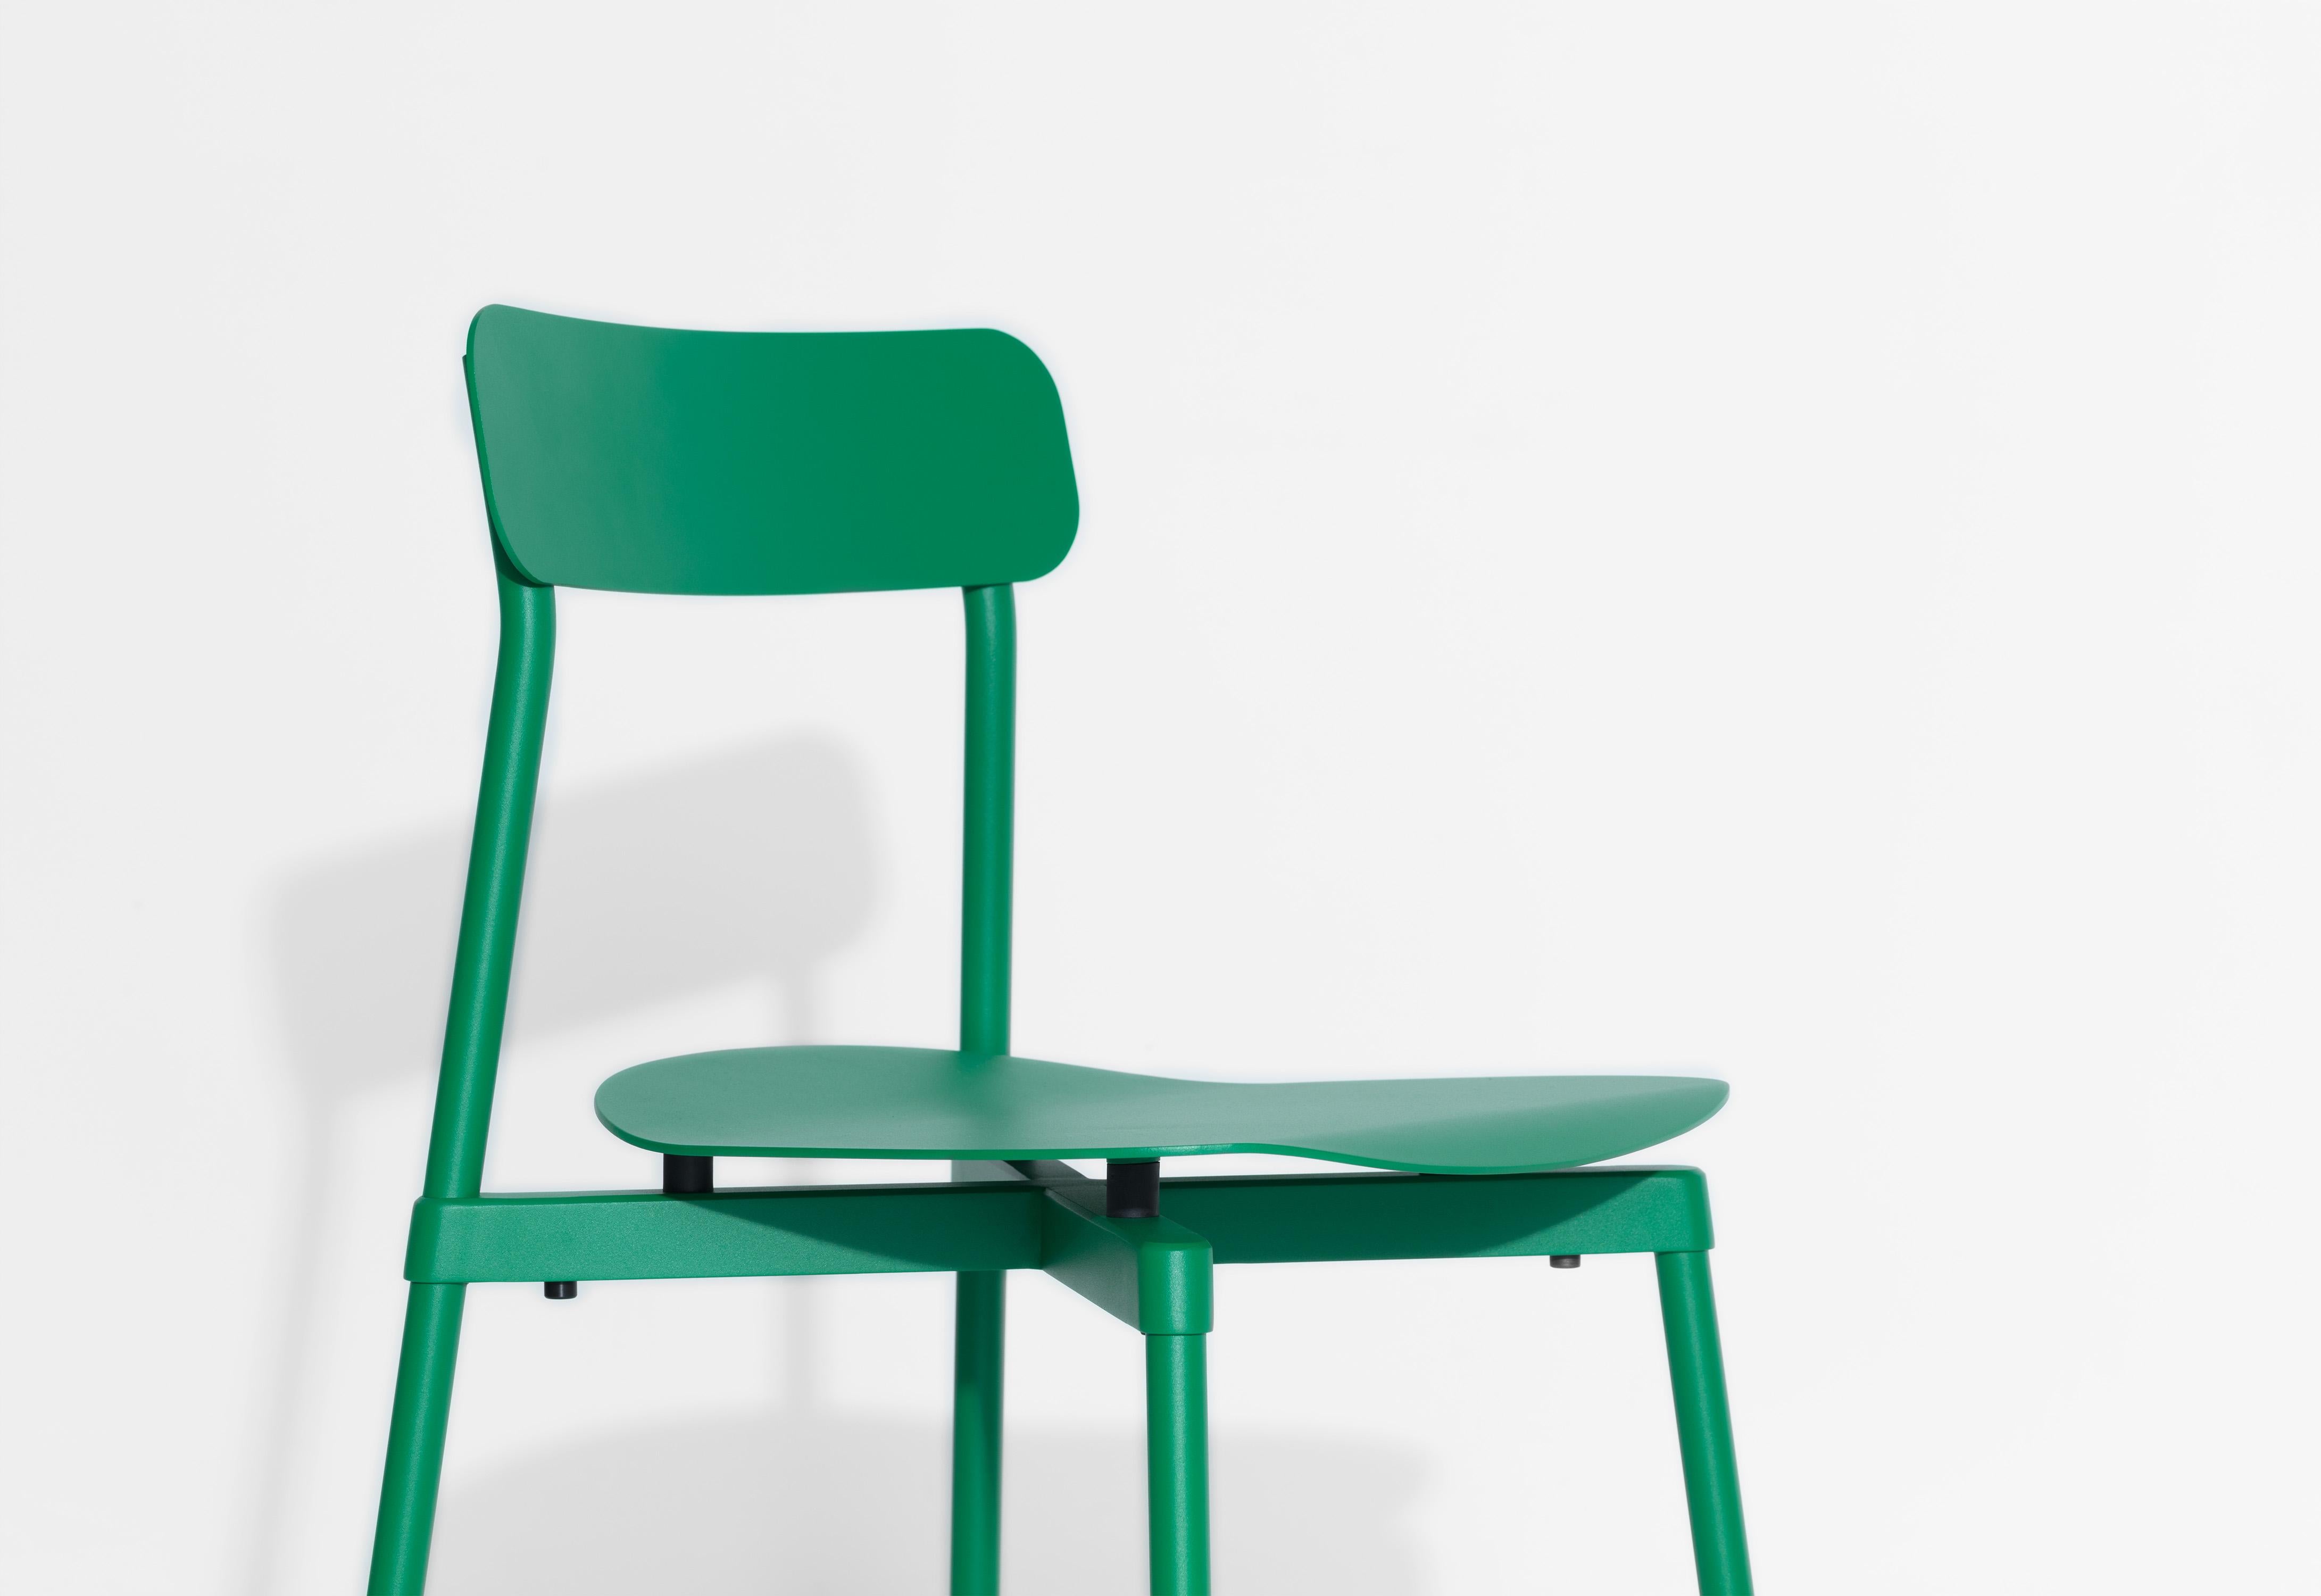 Aluminum Petite Friture Fromme Chair in Mint-Green Aluminium by Tom Chung, 2019 For Sale